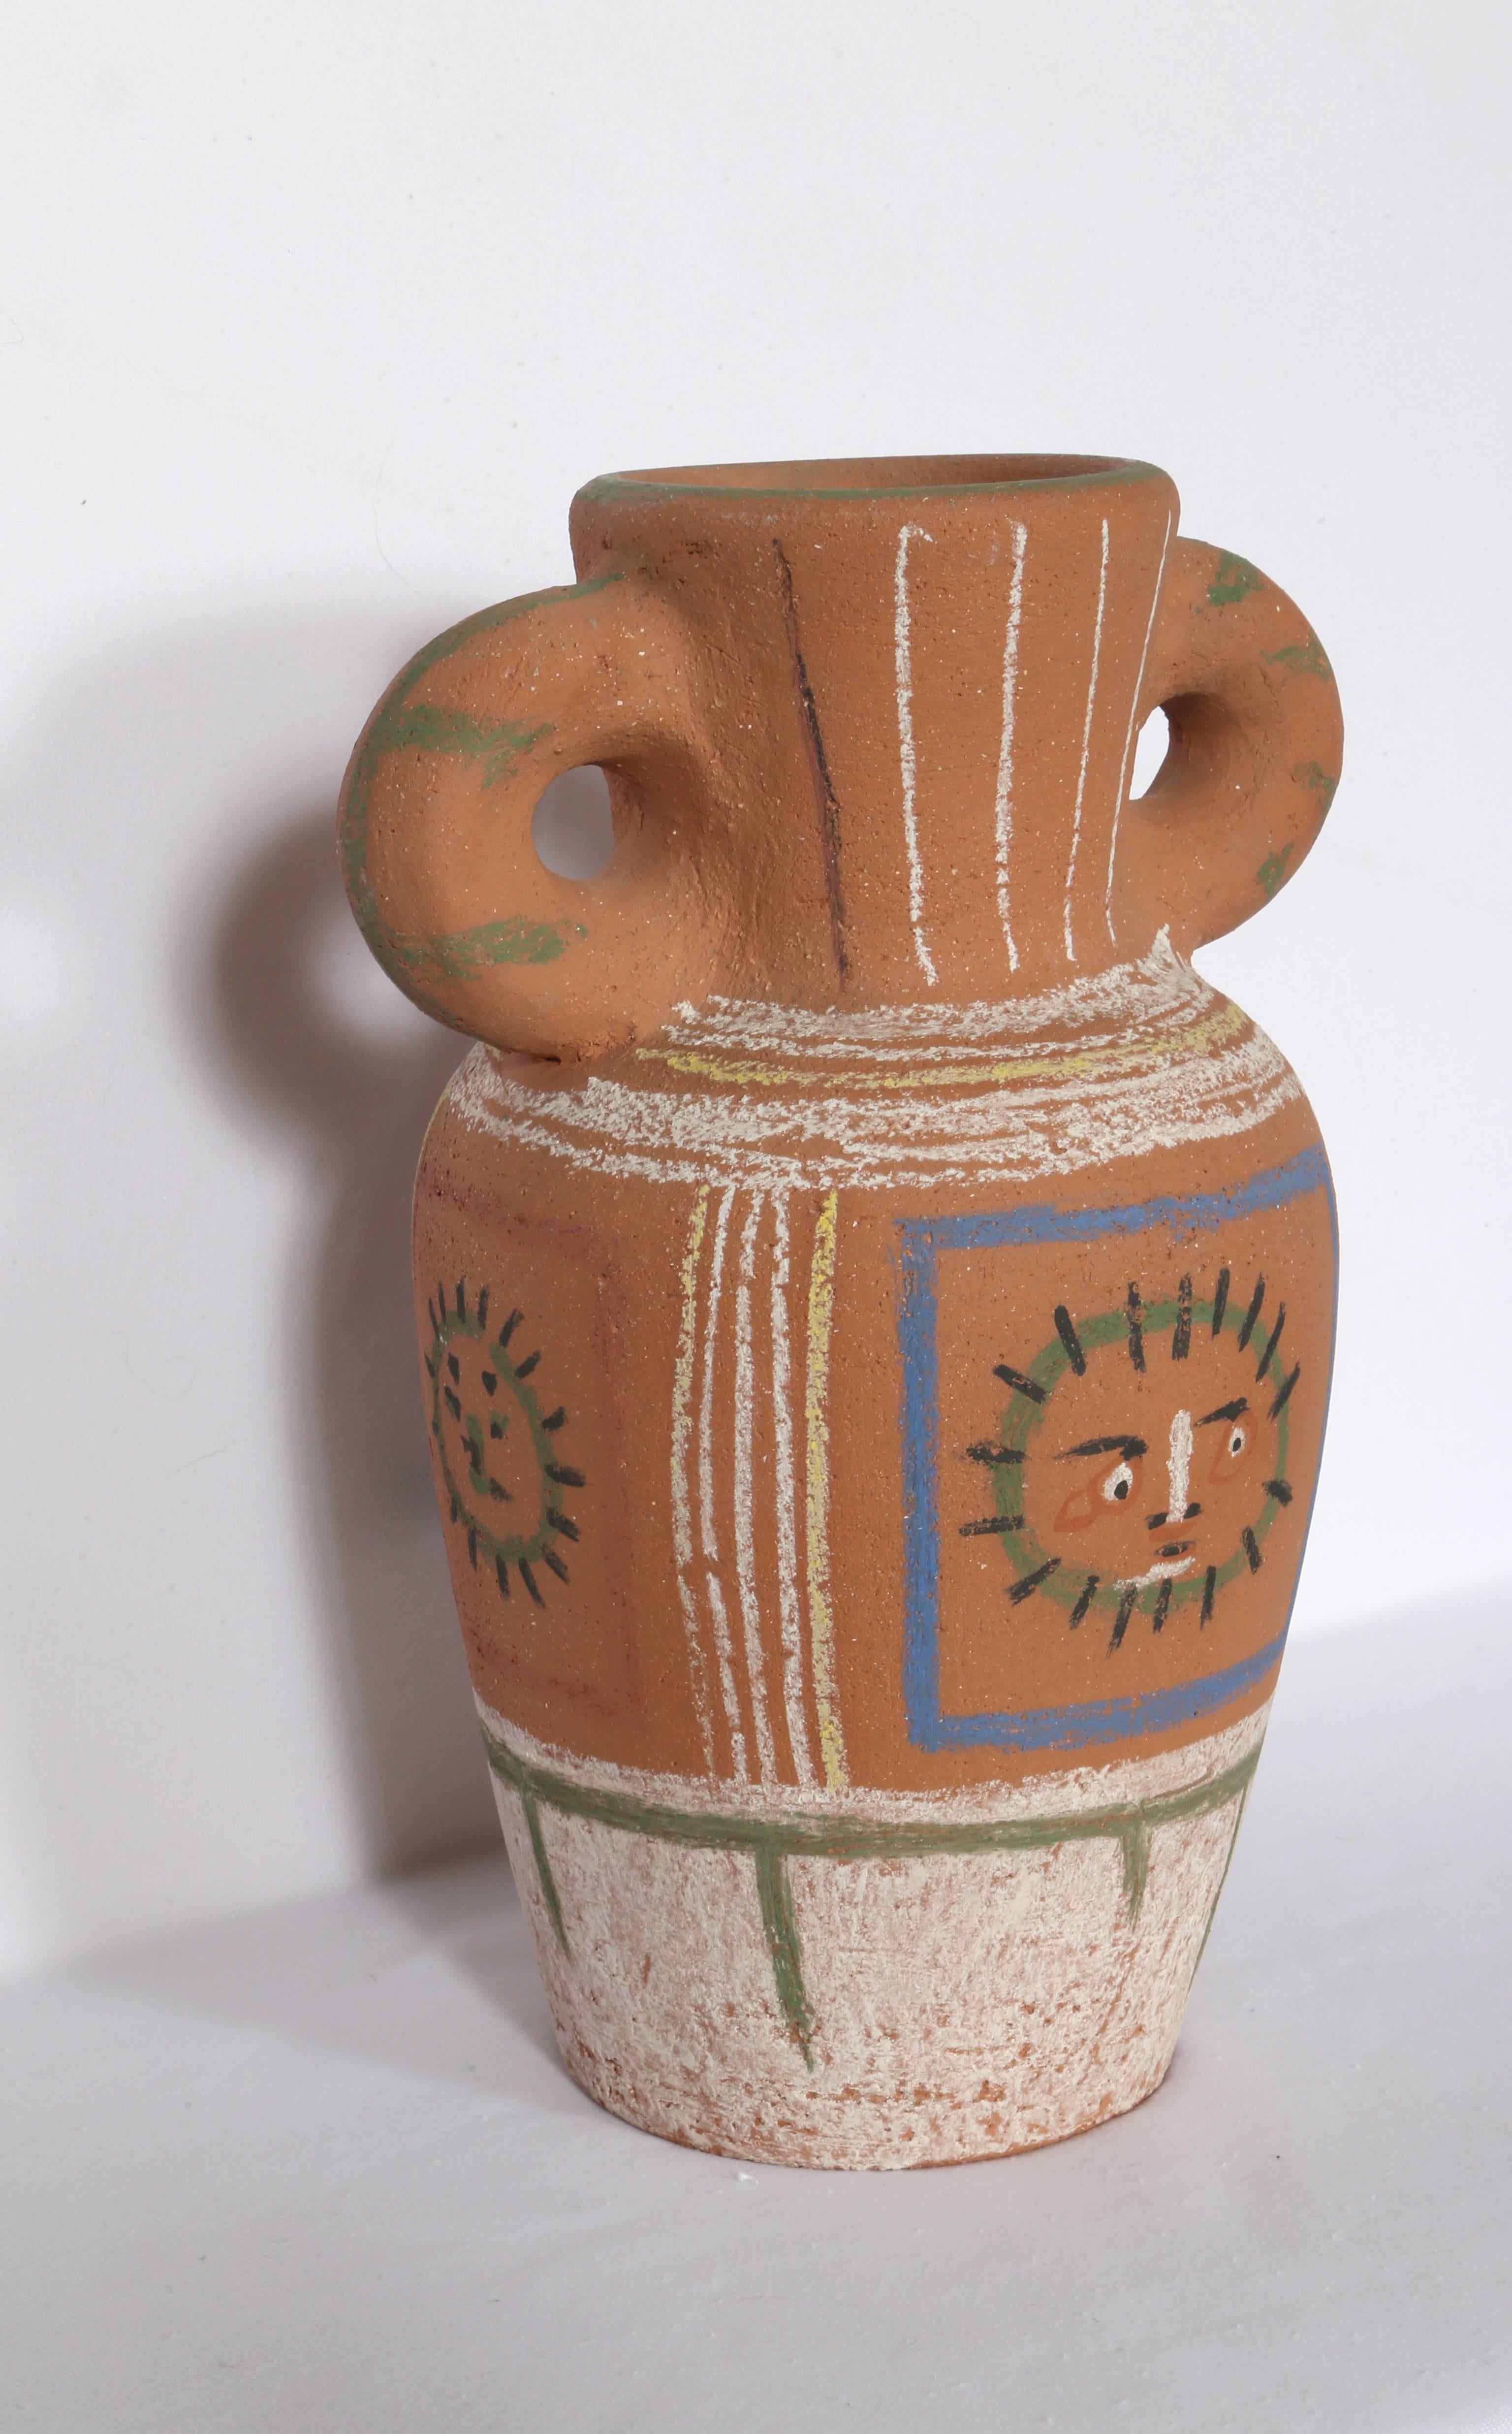 Artist: Pablo Picasso, Spanish (1881 - 1973)
Title: Vase avec decoration pastel (Vase with Pastel Decorations), [Ramie 190]
Year: 1953
Medium: Chamotted red earthenware clay, pastel decoration, stamped and numbered on bottom
Edition: 126/200
Size: